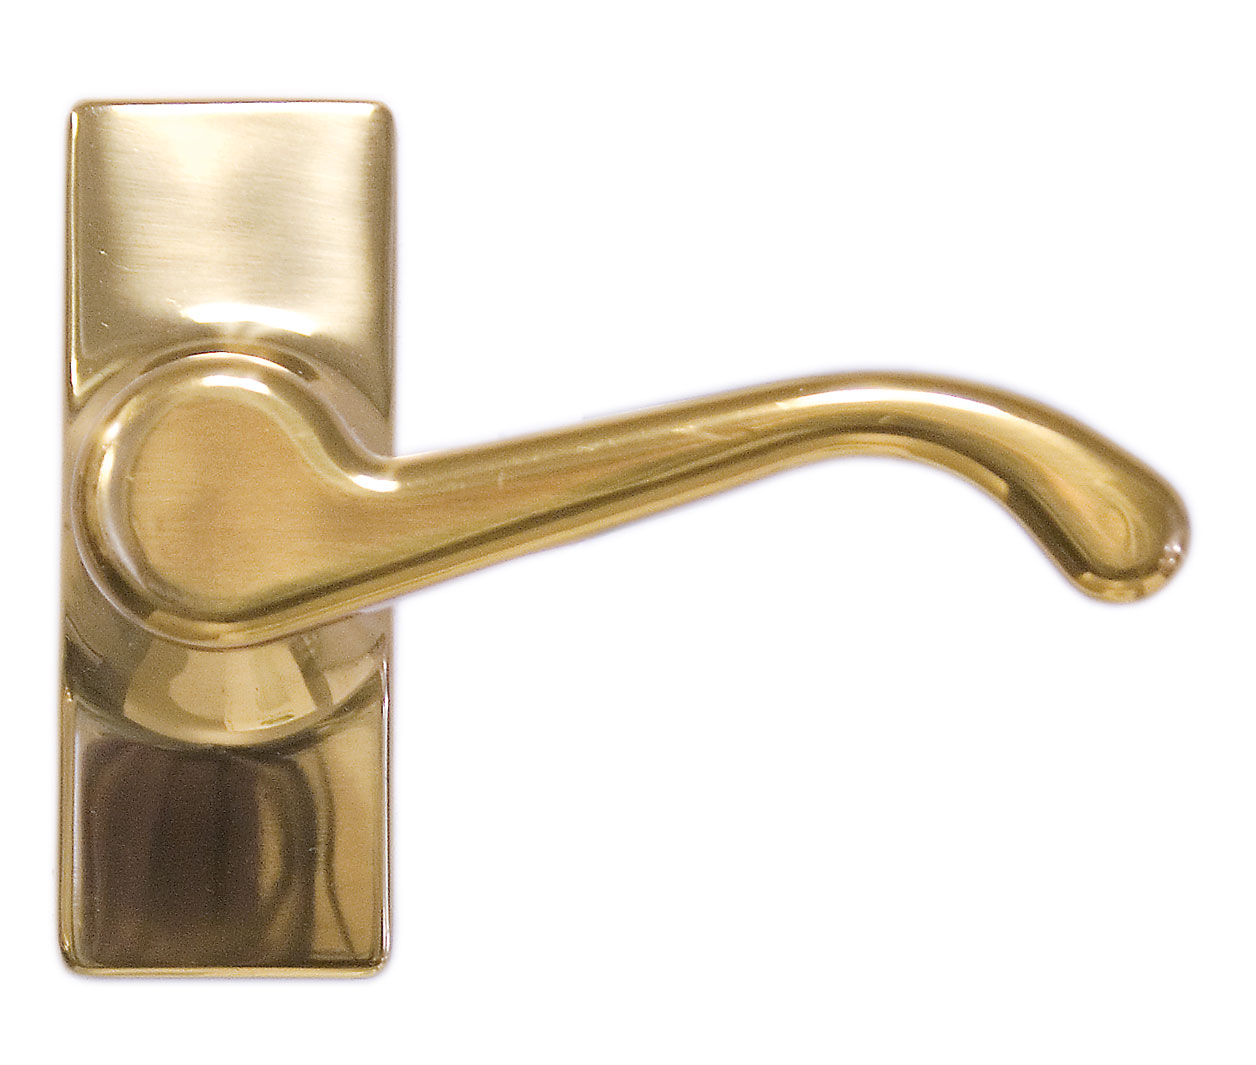 French Door Polished Brass - Door Hardware - Arch Angle Custom Arched Top Storm Windows & Storm Doors